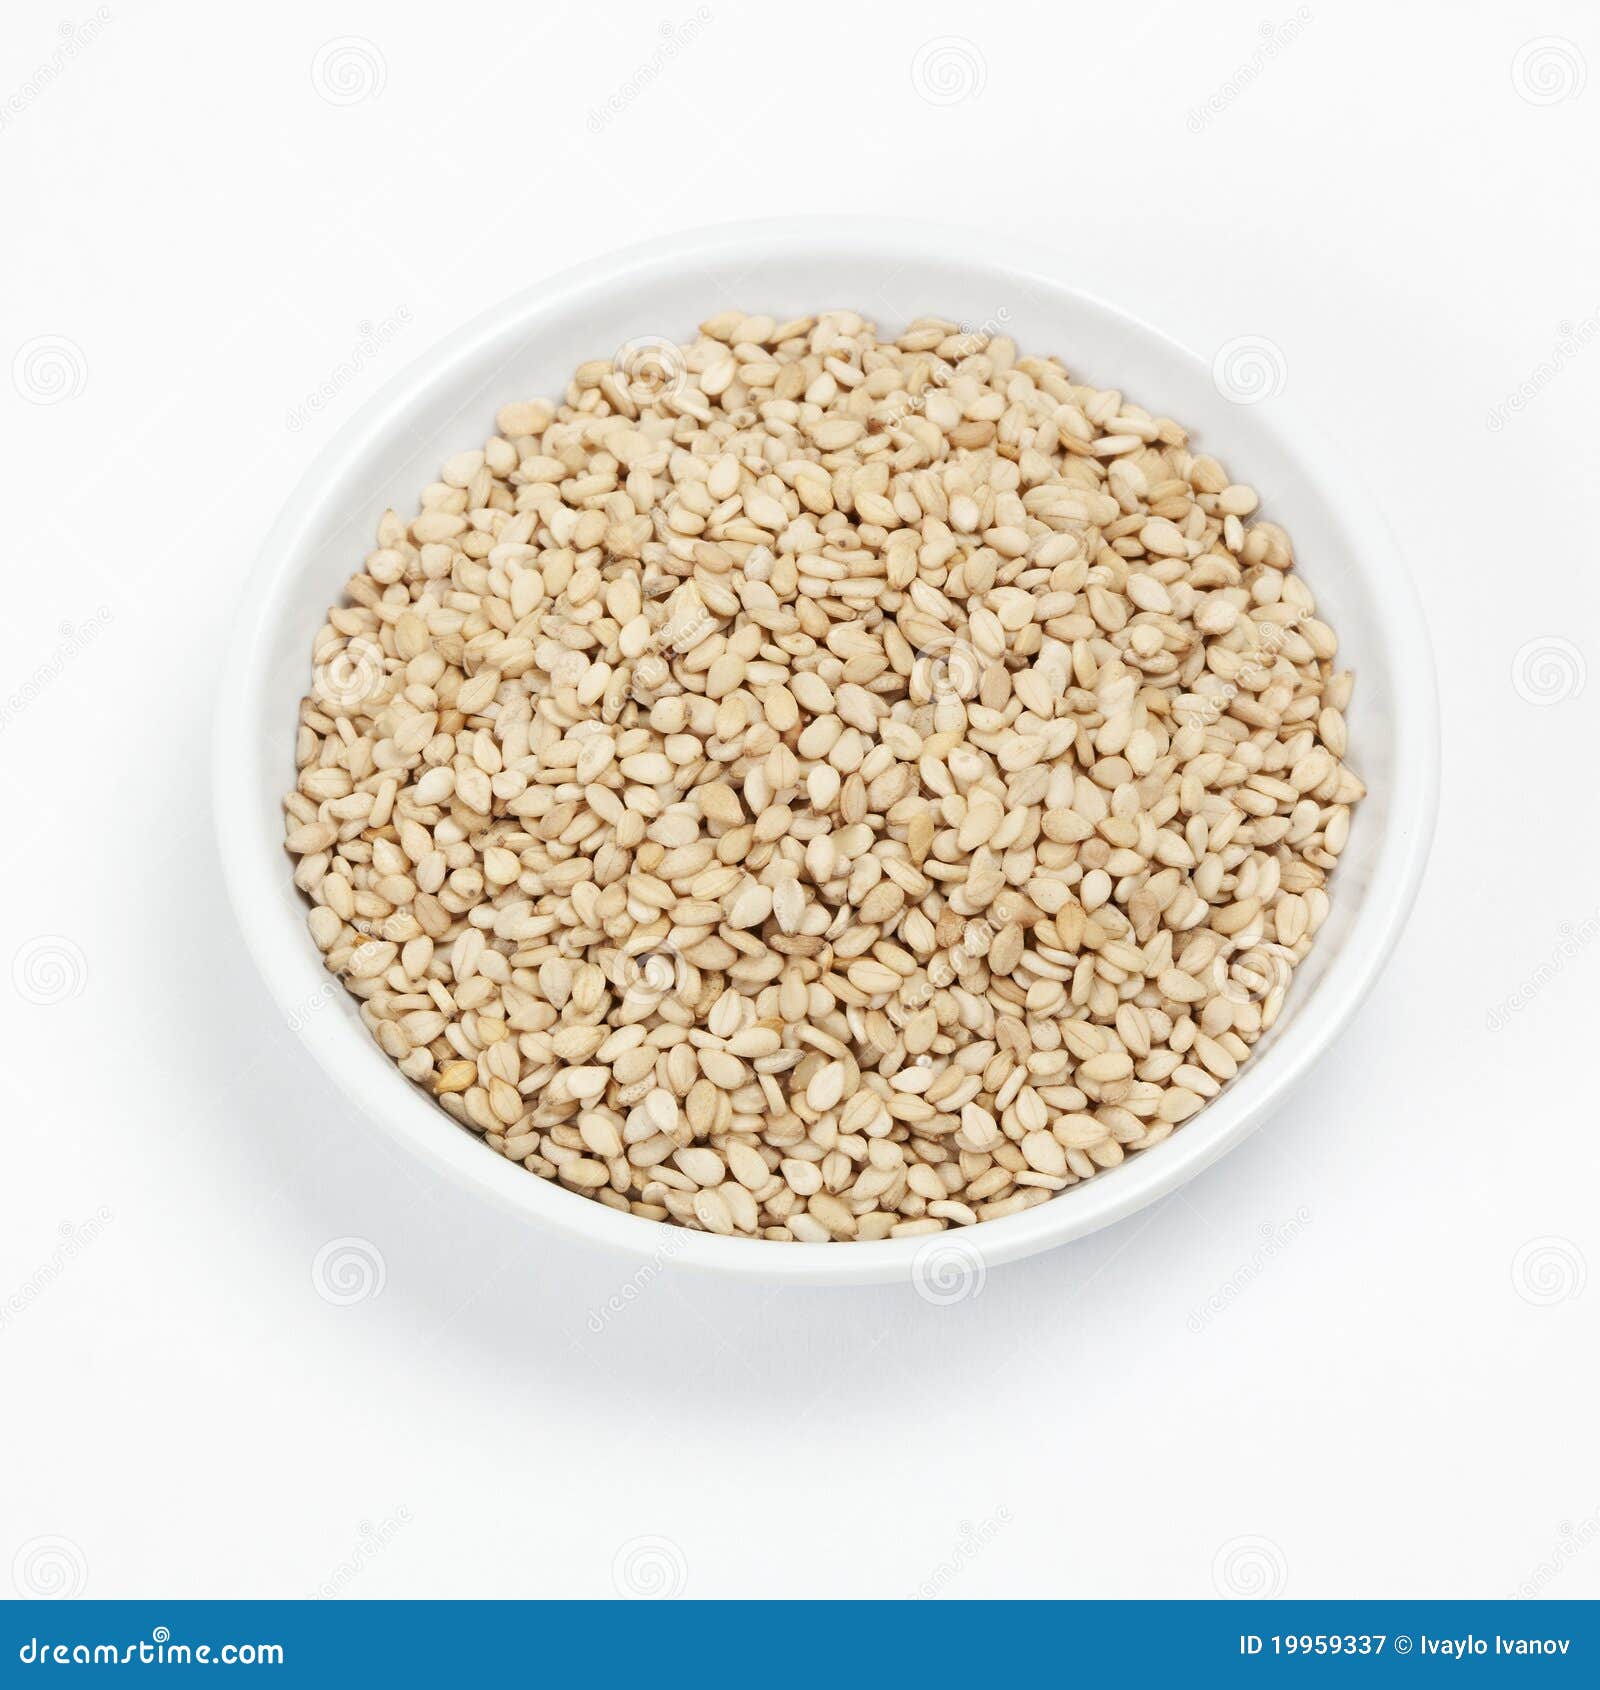 Bowl Of Sesame Seeds Royalty Free Stock Photography - Image: 199593371300 x 1390